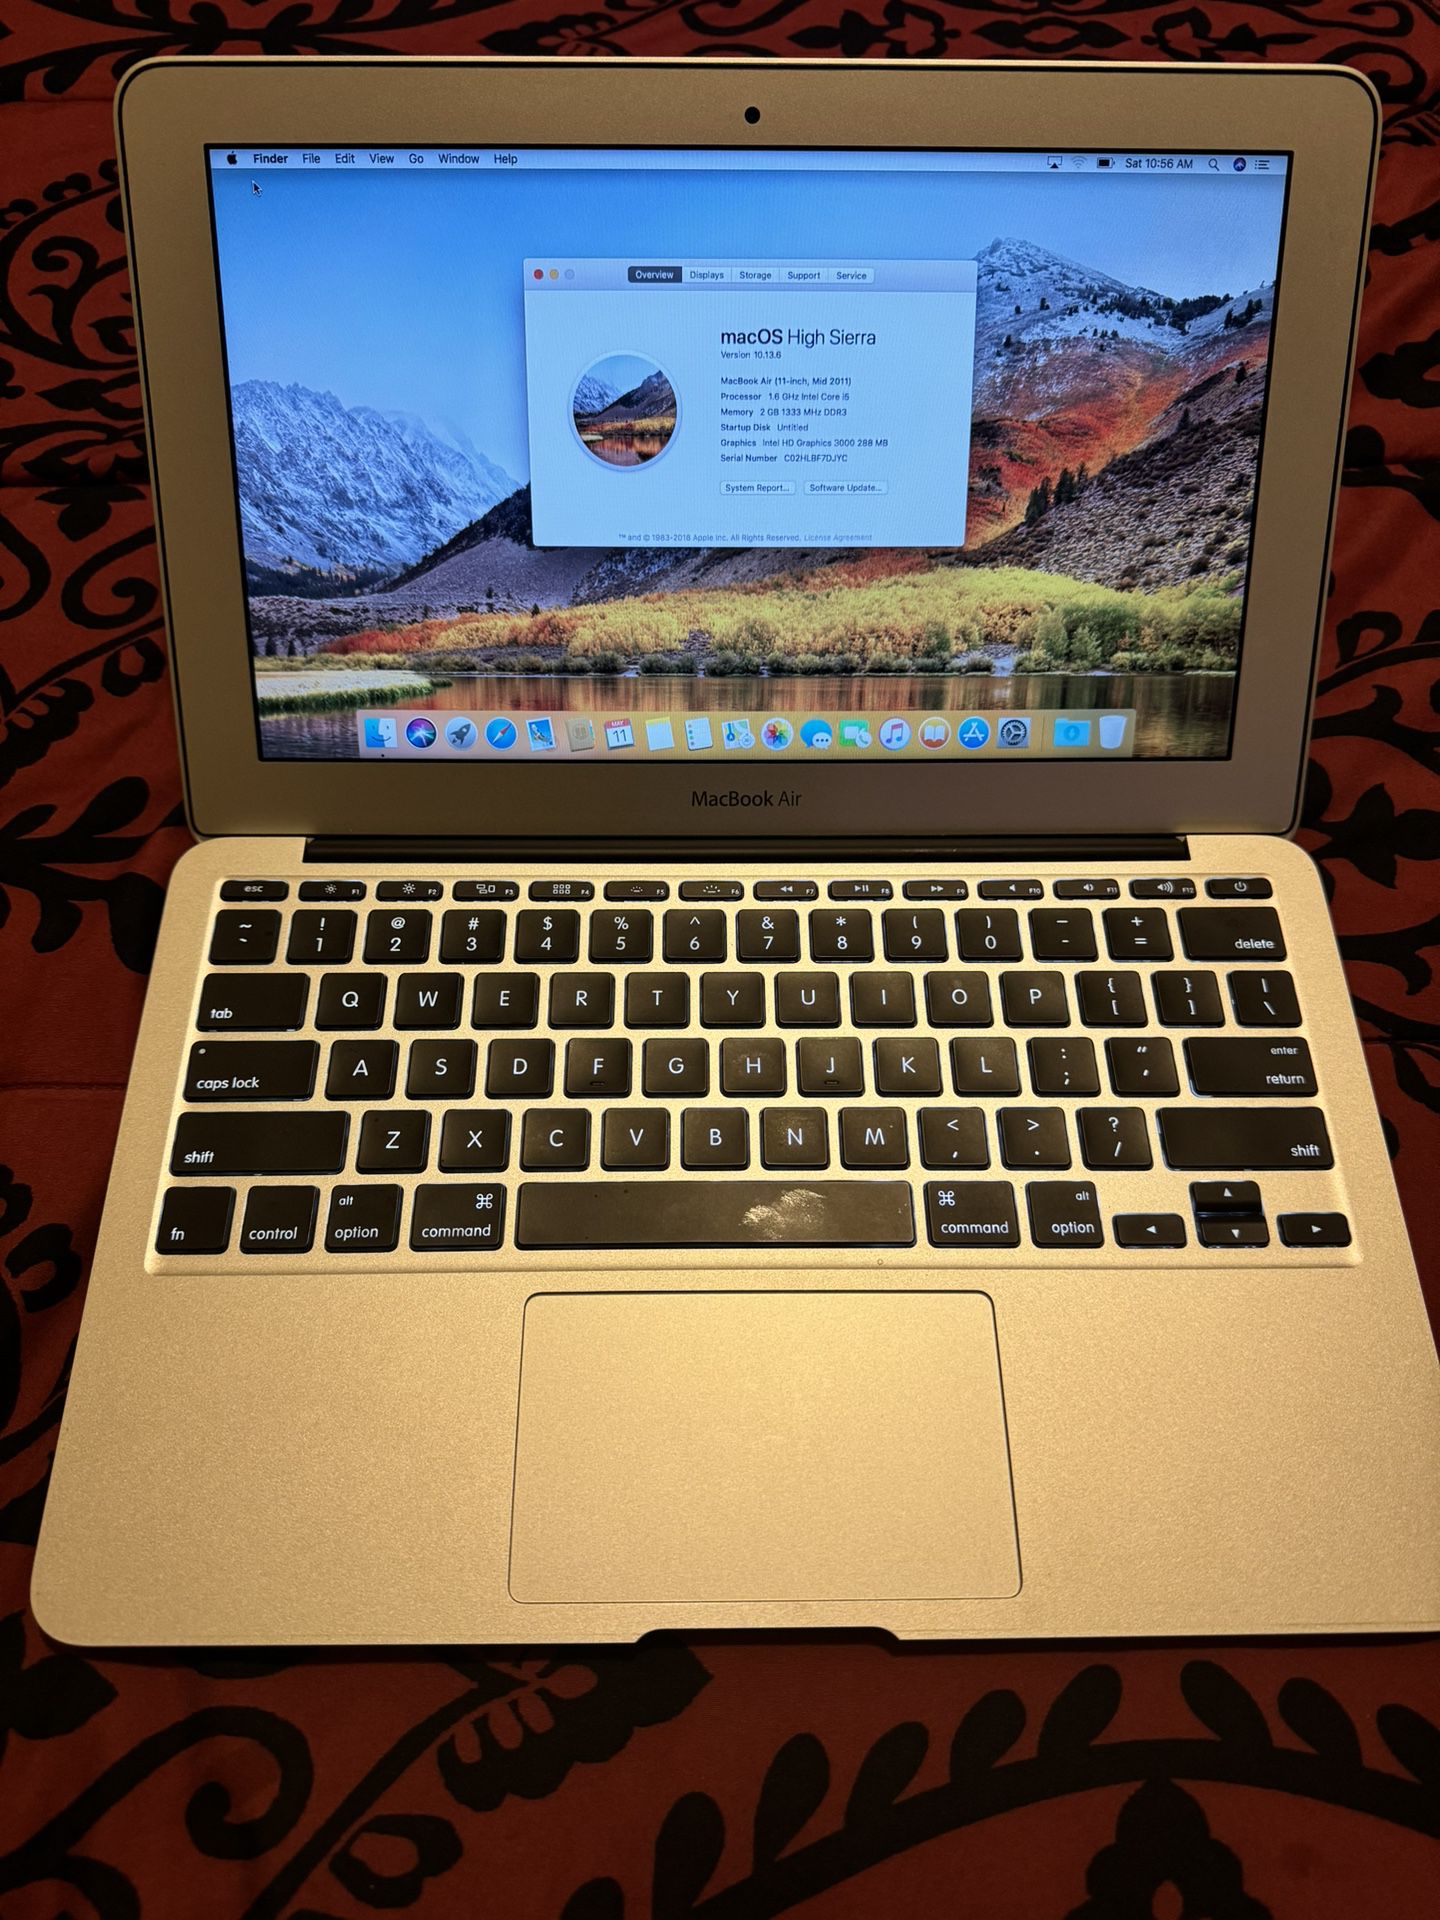 MacBook Air mid- 2011 (11-inch) No Scratches, No Dent/Dings….Excellent Condition  macOS “”High Sierra”